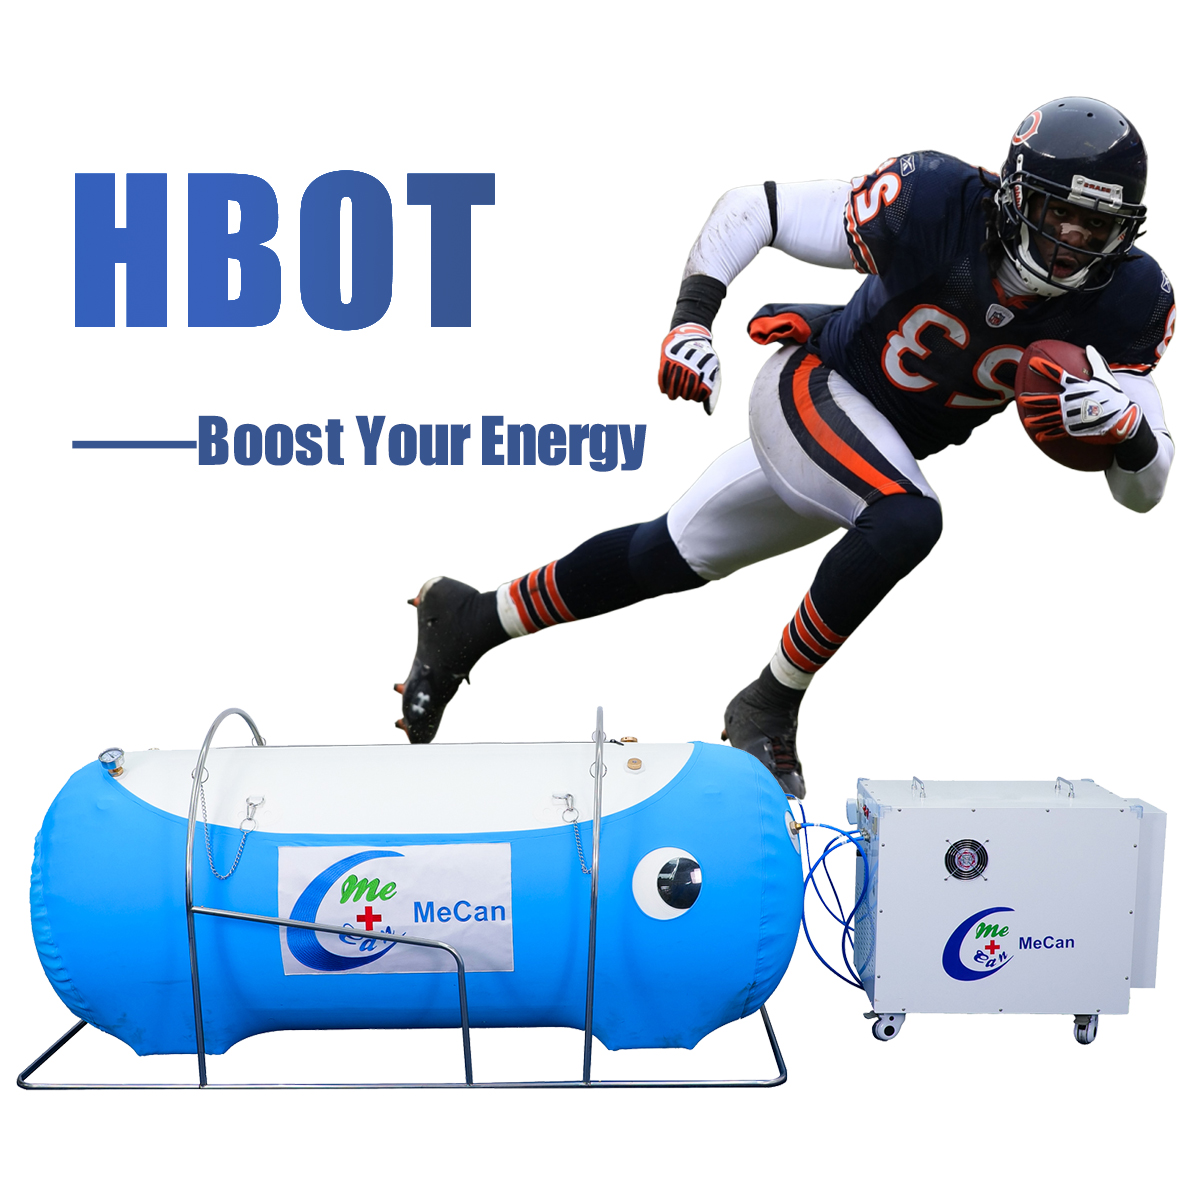 Professional Portable Hyperbaric Chamber for Sale Oxygen Concentrators for Skin /Beauty Care manufacturers